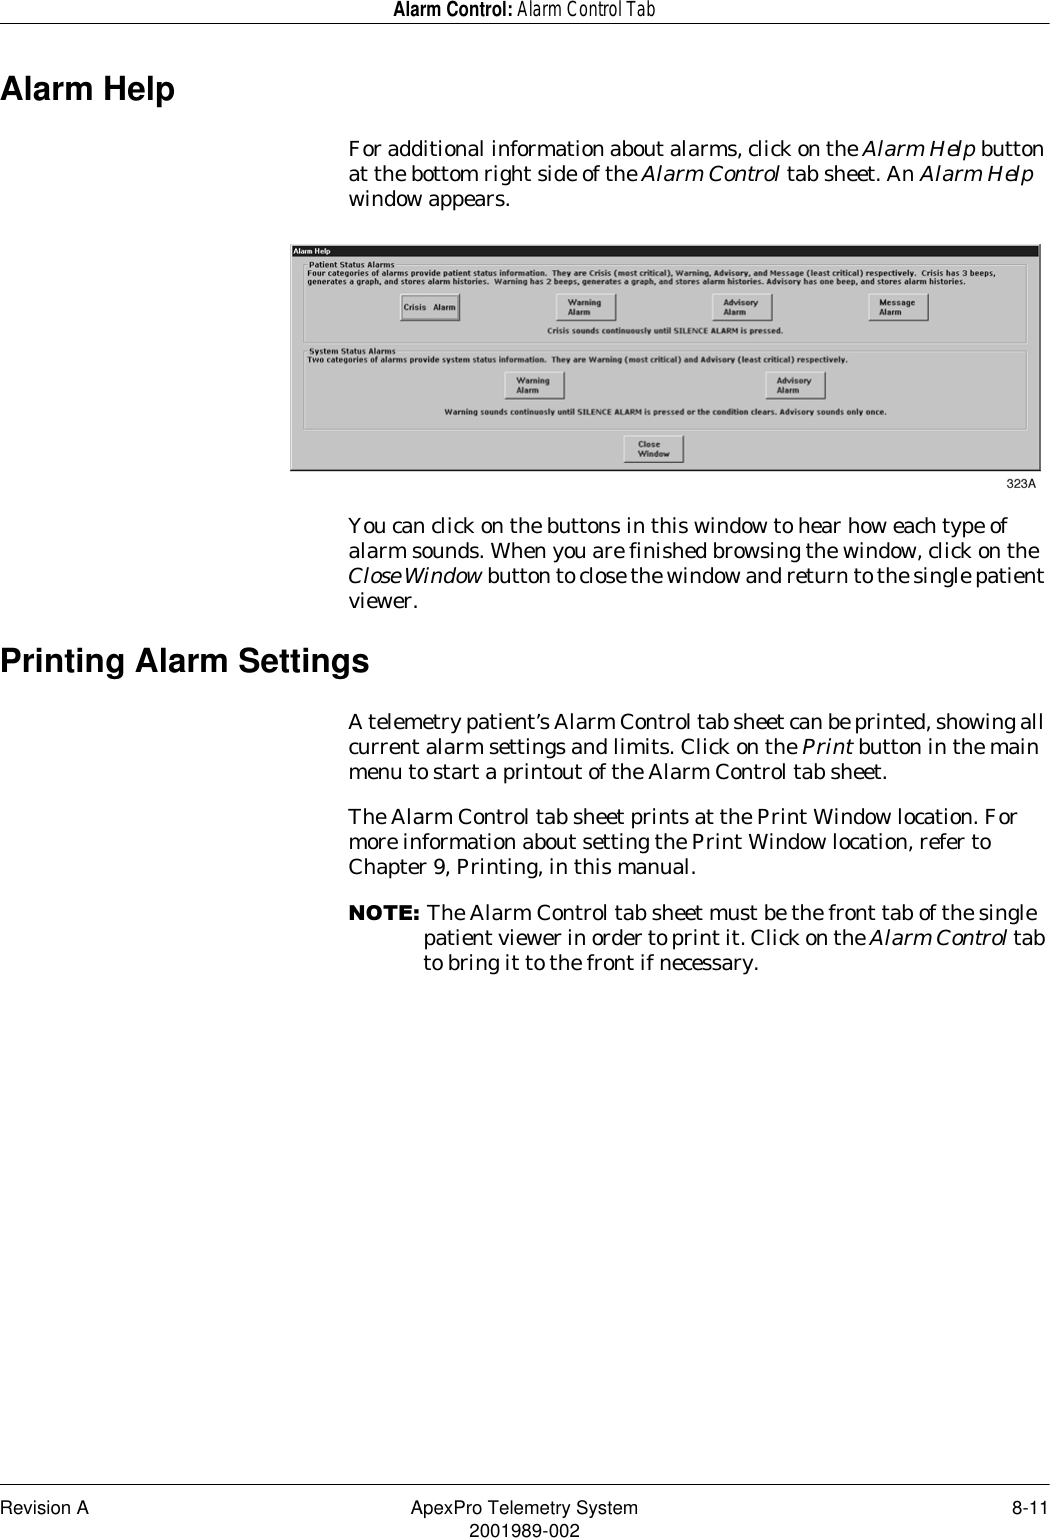 Revision A ApexPro Telemetry System 8-112001989-002Alarm Control: Alarm Control TabAlarm HelpFor additional information about alarms, click on the Alarm Help button at the bottom right side of the Alarm Control tab sheet. An Alarm Help window appears.You can click on the buttons in this window to hear how each type of alarm sounds. When you are finished browsing the window, click on the Close Window button to close the window and return to the single patient viewer.Printing Alarm SettingsA telemetry patient’s Alarm Control tab sheet can be printed, showing all current alarm settings and limits. Click on the Print button in the main menu to start a printout of the Alarm Control tab sheet.The Alarm Control tab sheet prints at the Print Window location. For more information about setting the Print Window location, refer to Chapter 9, Printing, in this manual.127(The Alarm Control tab sheet must be the front tab of the single patient viewer in order to print it. Click on the Alarm Control tab to bring it to the front if necessary.